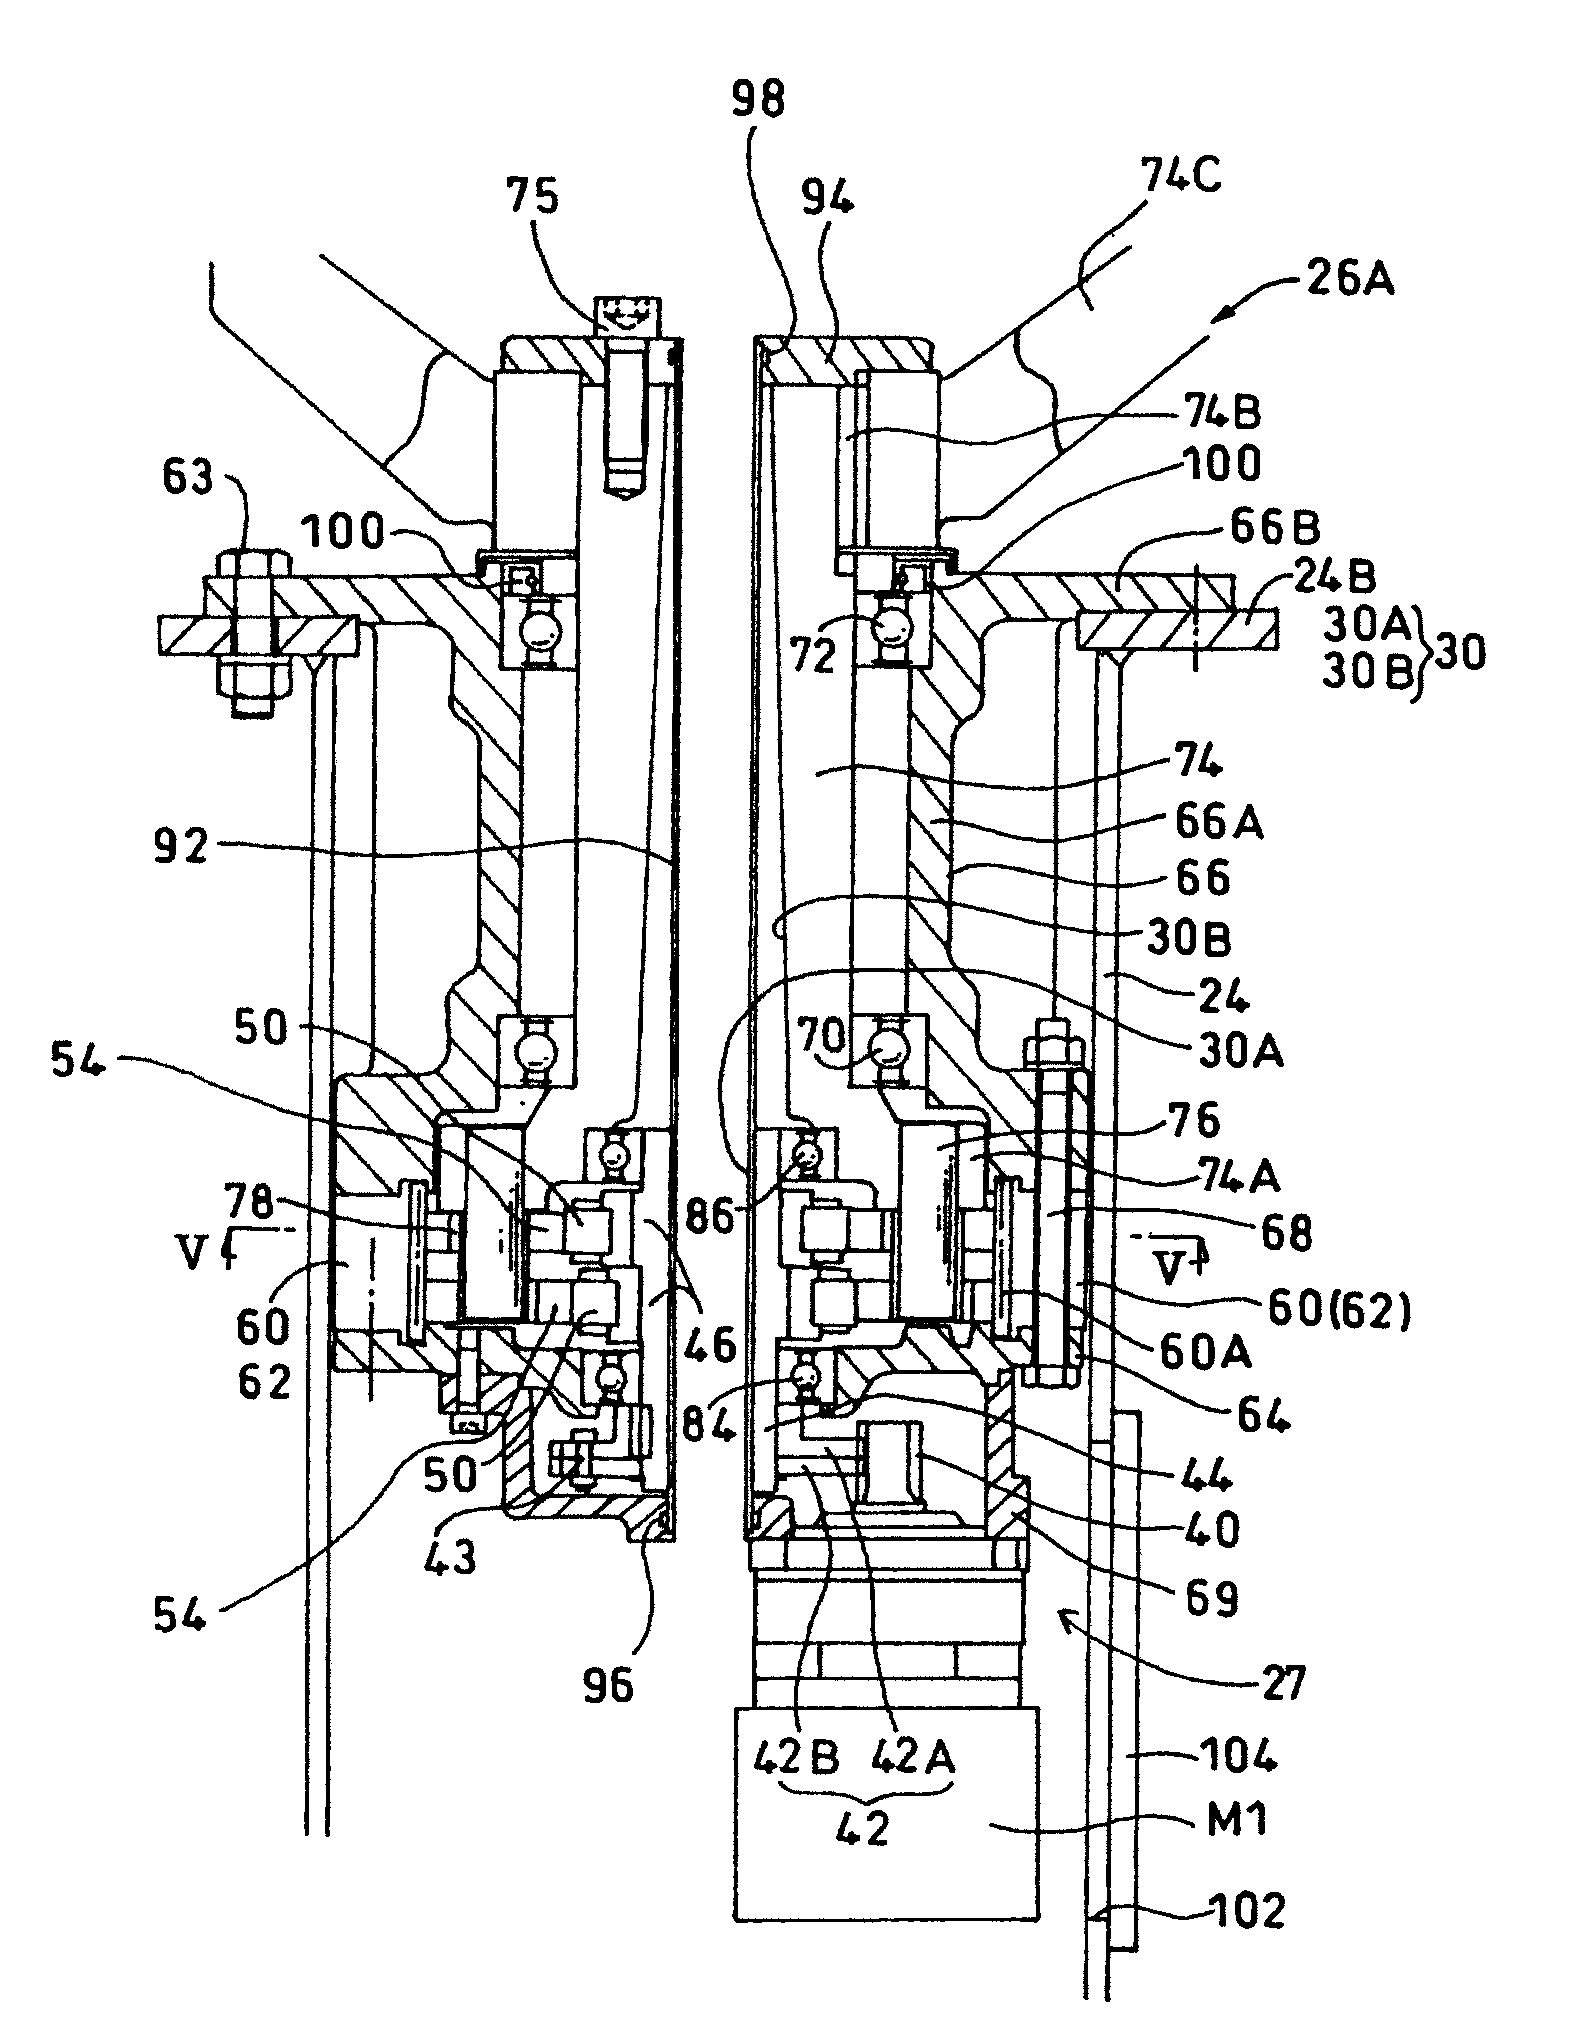 Power transmission device and method of producing the same